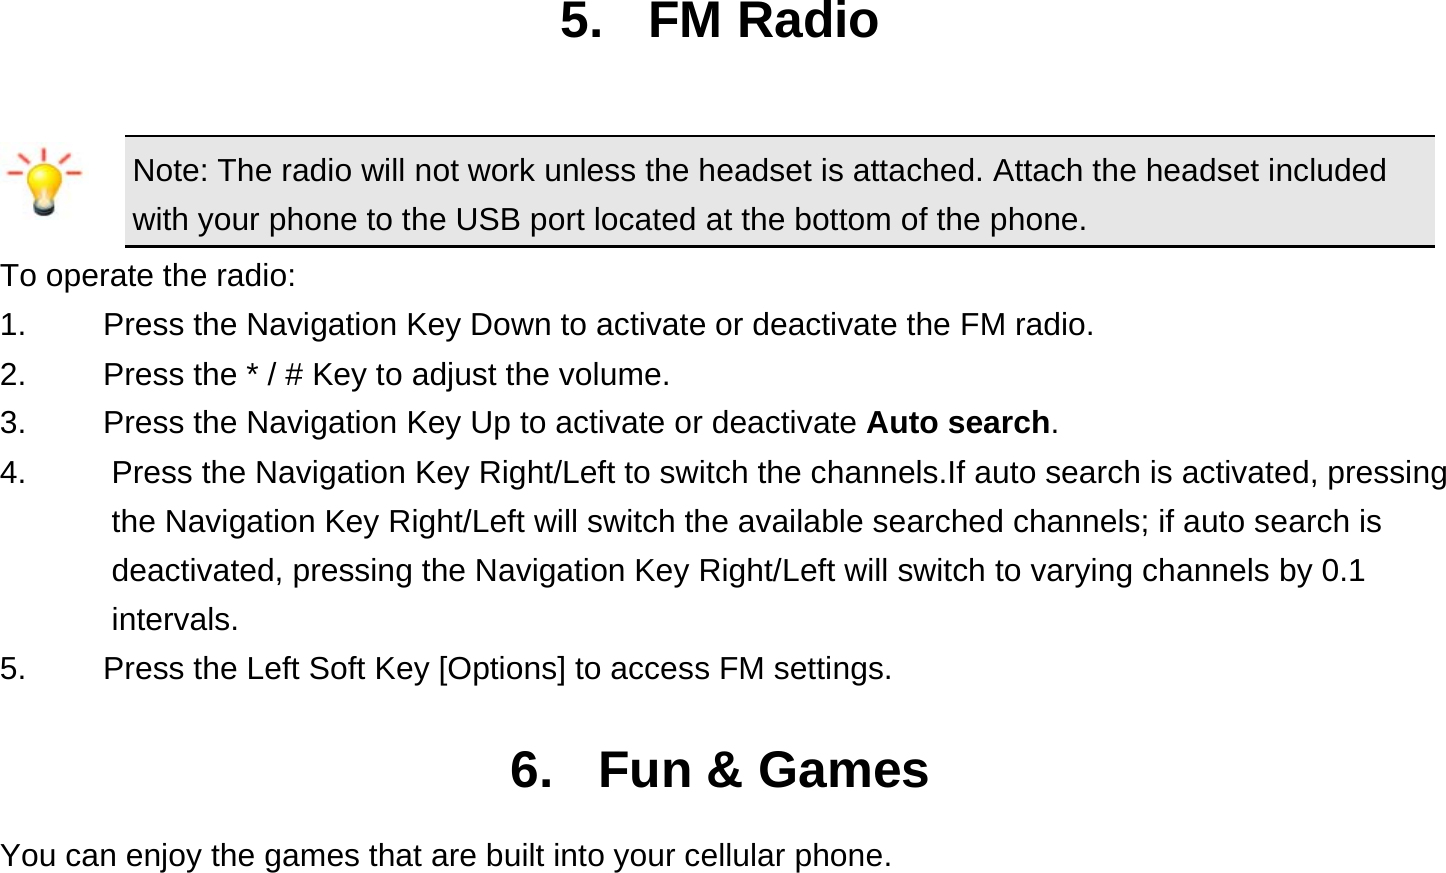  5. FM Radio Note: The radio will not work unless the headset is attached. Attach the headset included with your phone to the USB port located at the bottom of the phone. To operate the radio: 1.    Press the Navigation Key Down to activate or deactivate the FM radio. 2.    Press the * / # Key to adjust the volume. 3.    Press the Navigation Key Up to activate or deactivate Auto search. 4.  Press the Navigation Key Right/Left to switch the channels.If auto search is activated, pressing the Navigation Key Right/Left will switch the available searched channels; if auto search is deactivated, pressing the Navigation Key Right/Left will switch to varying channels by 0.1 intervals. 5.    Press the Left Soft Key [Options] to access FM settings.  6. Fun &amp; Games You can enjoy the games that are built into your cellular phone.  